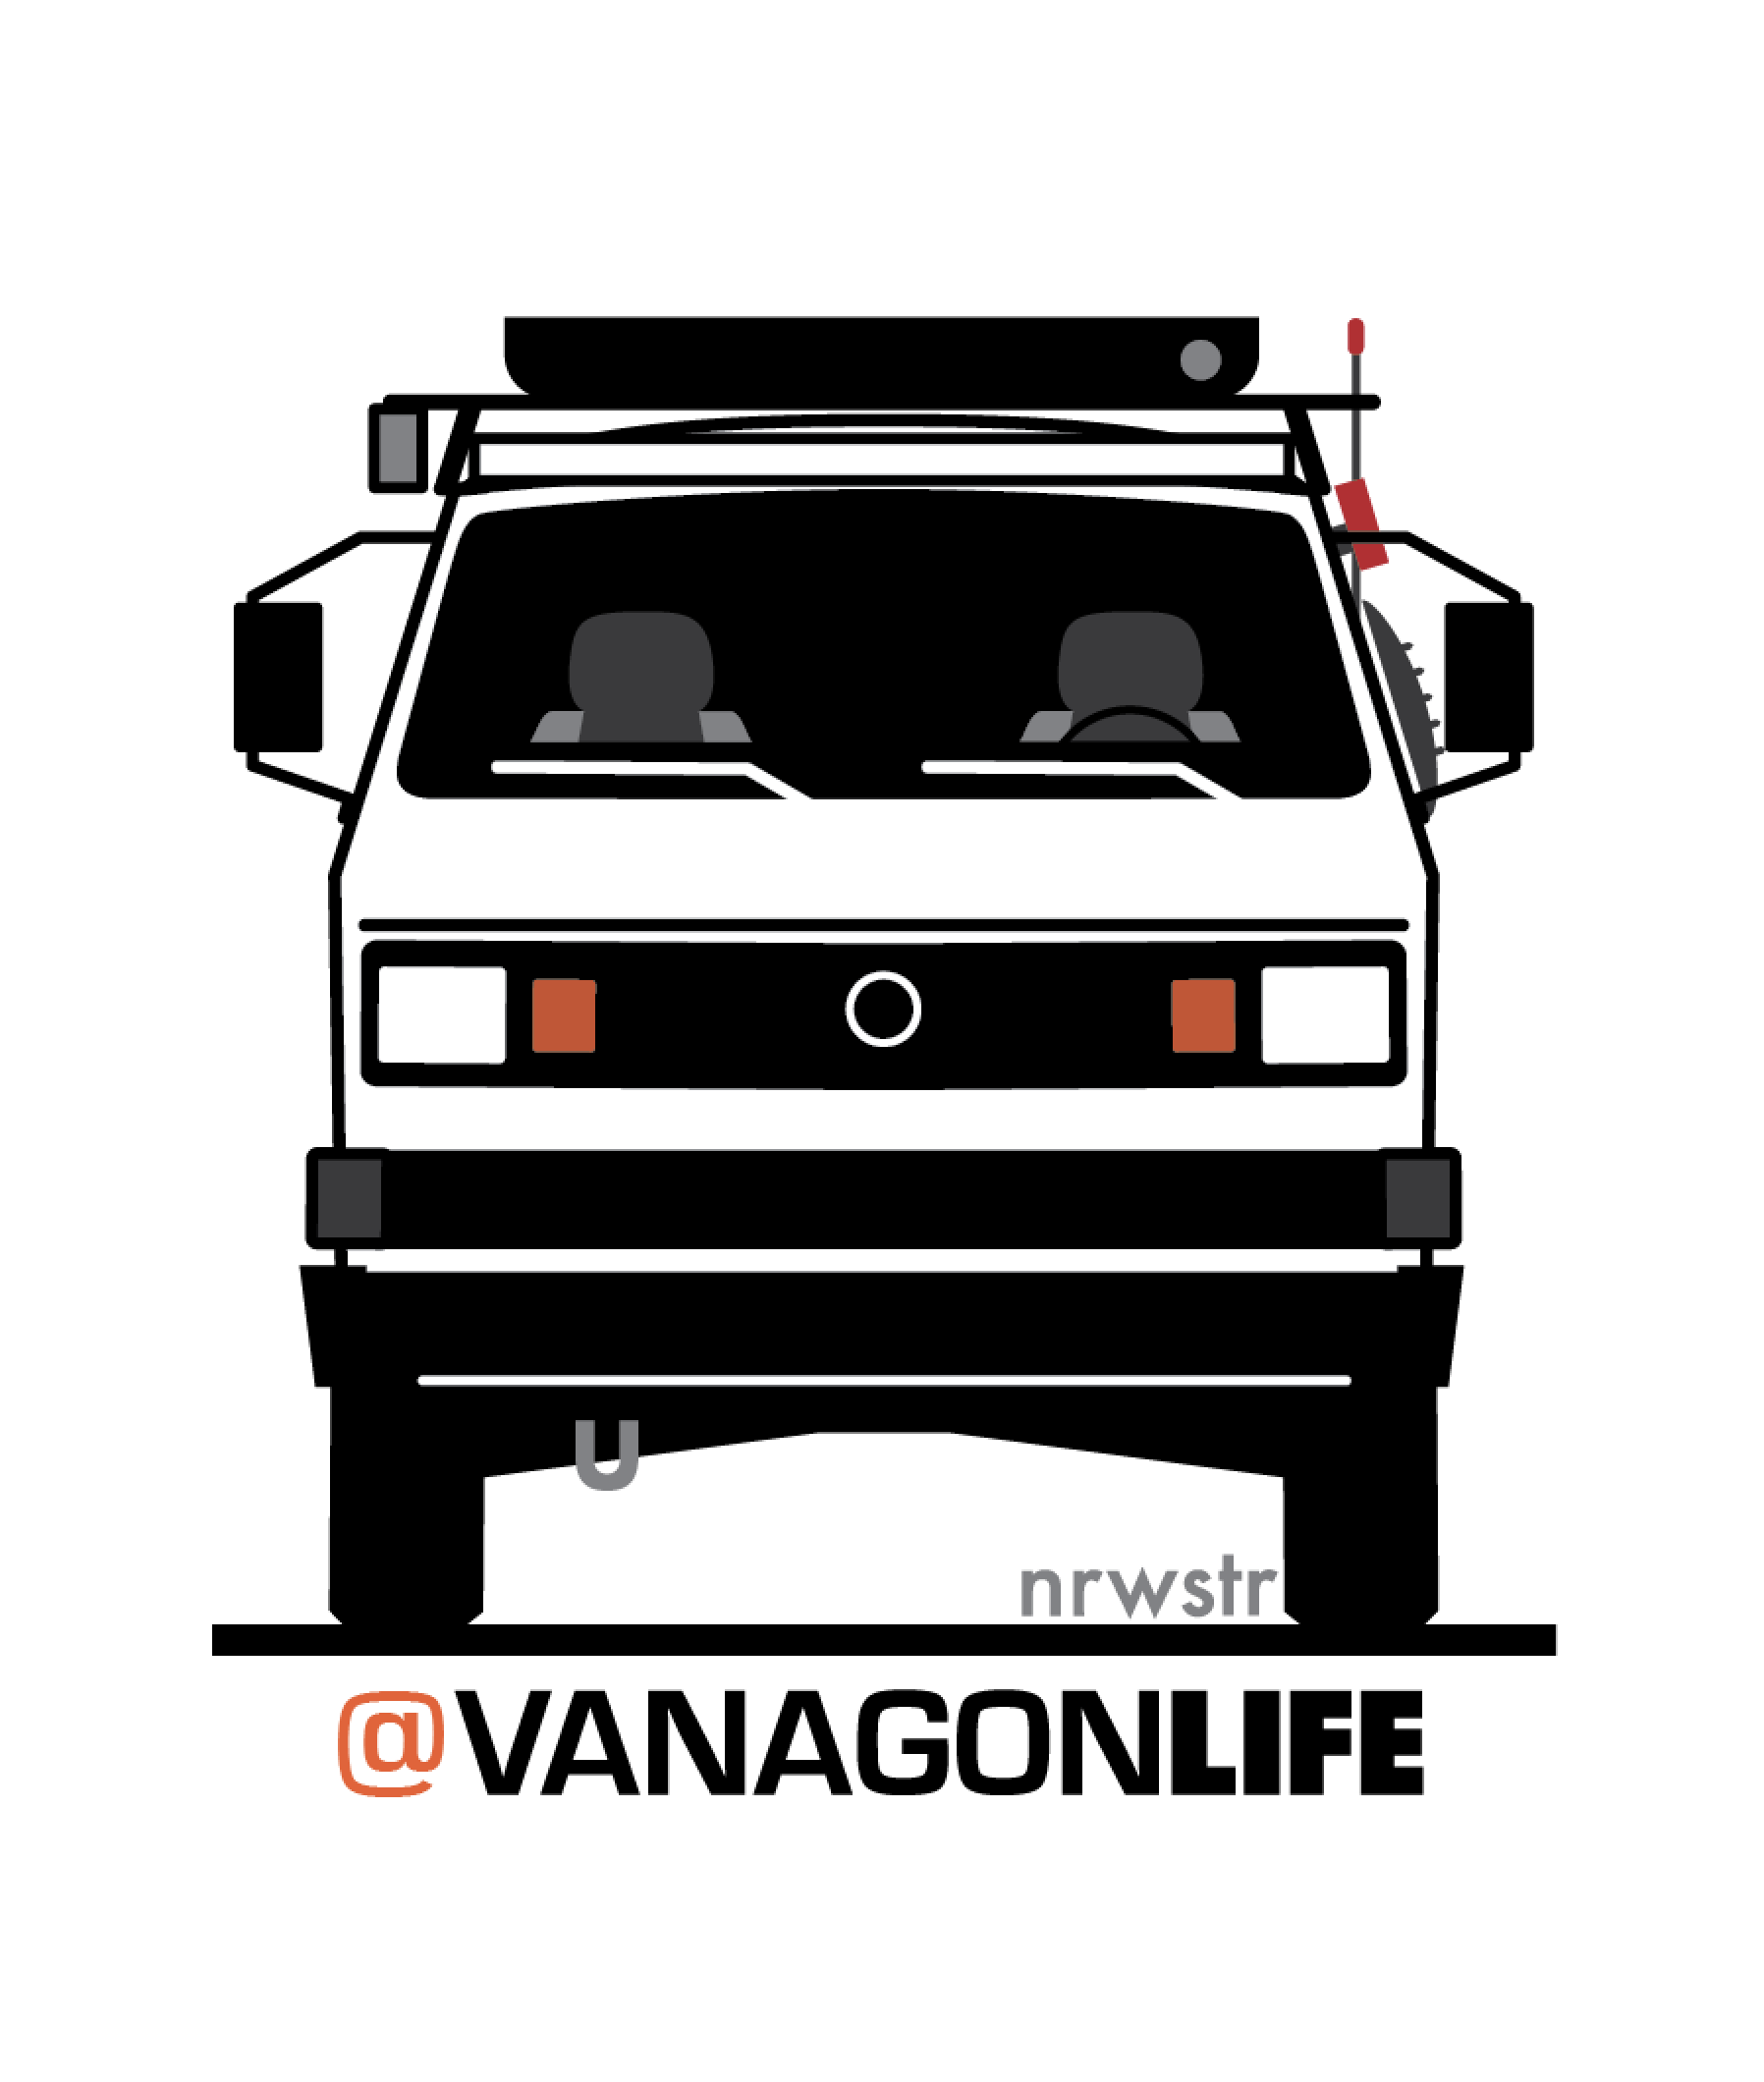 vanagonlife front view.png